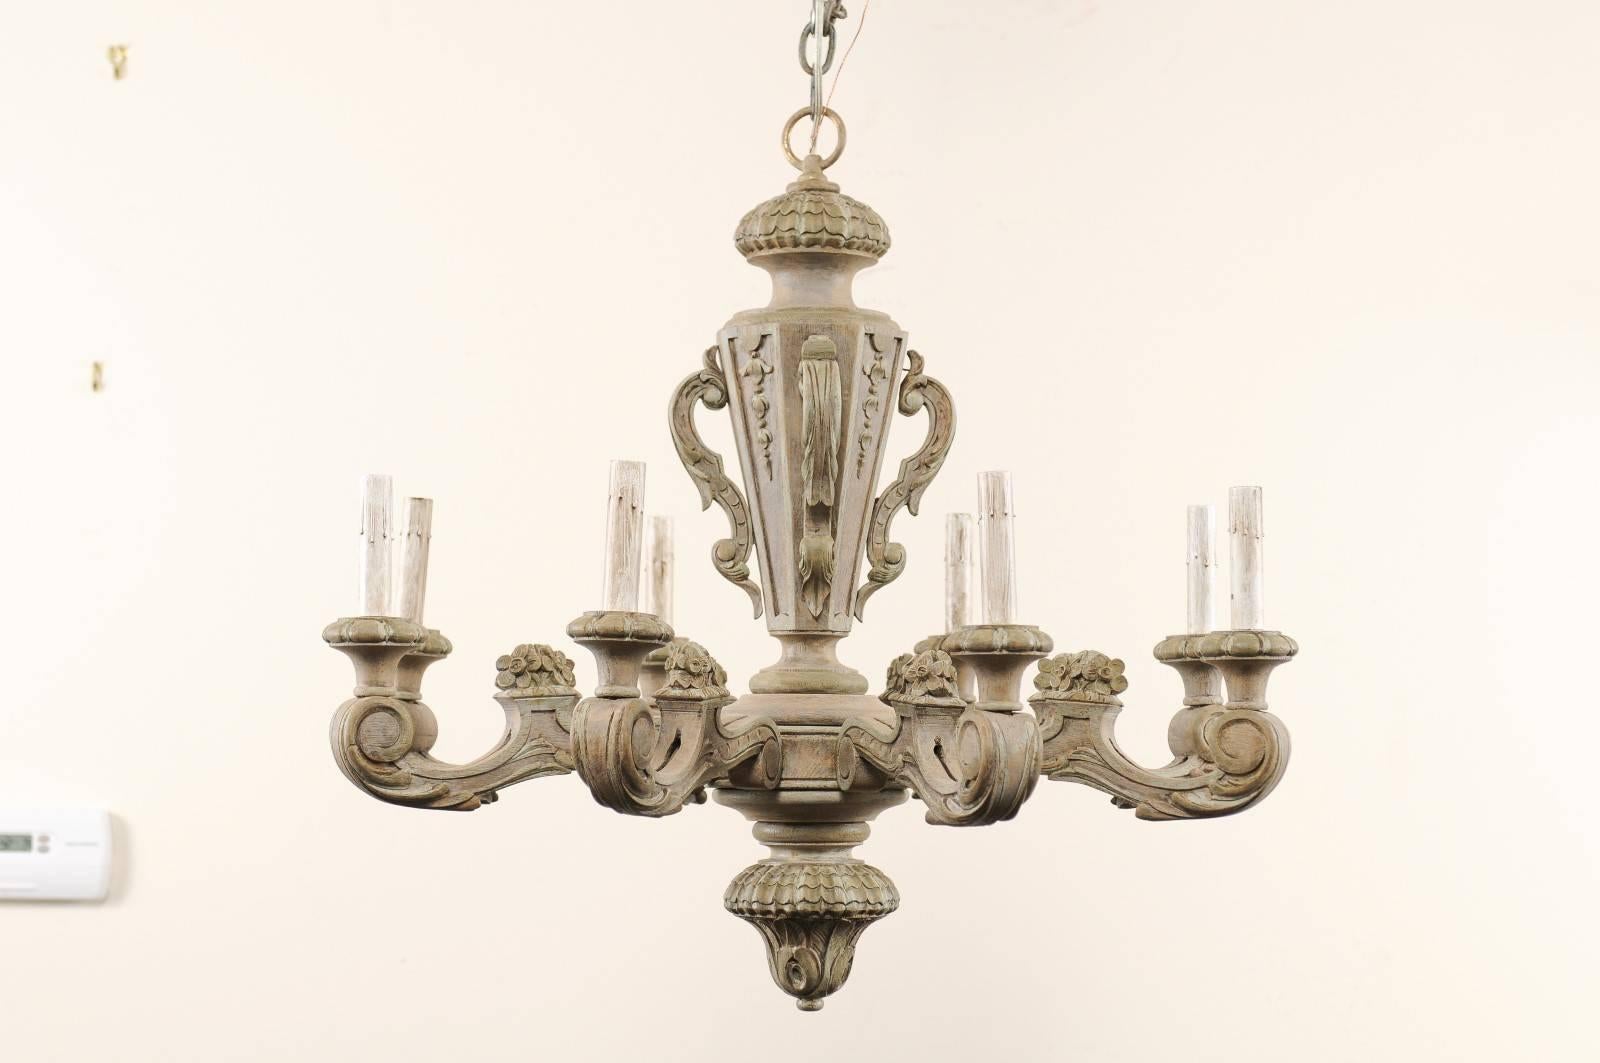 A French carved and painted wood eight light chandelier. This French midcentury chandelier features a beautifully carved column with eight scrolled arms extending outward. There is a lovely leaf and floral motif throughout, wooden bobeche and custom